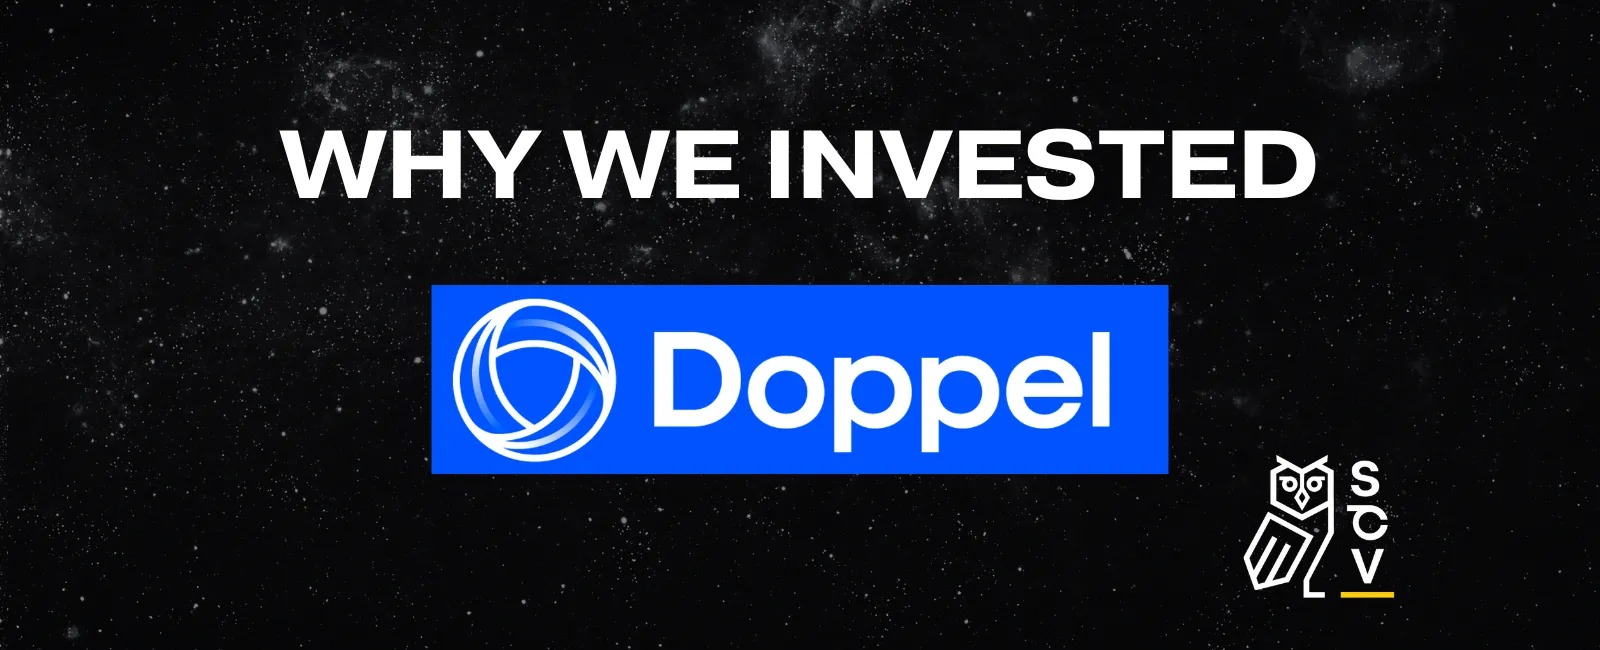 Doppel Investment by Strategic Cyber Ventures